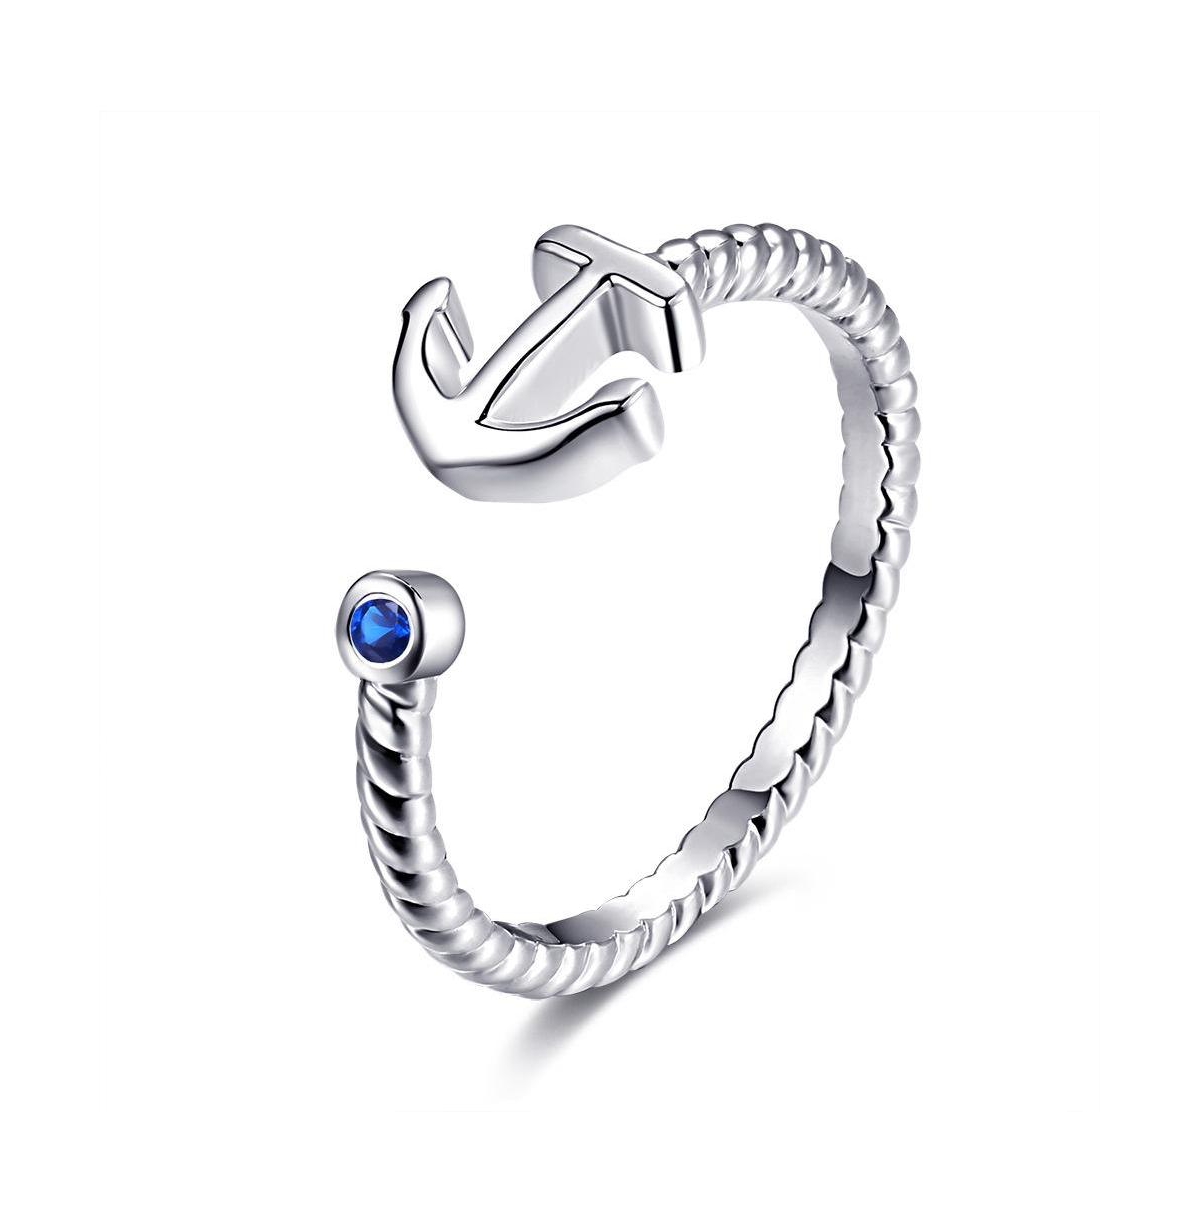 Adjustable Anchor Ring - Silver